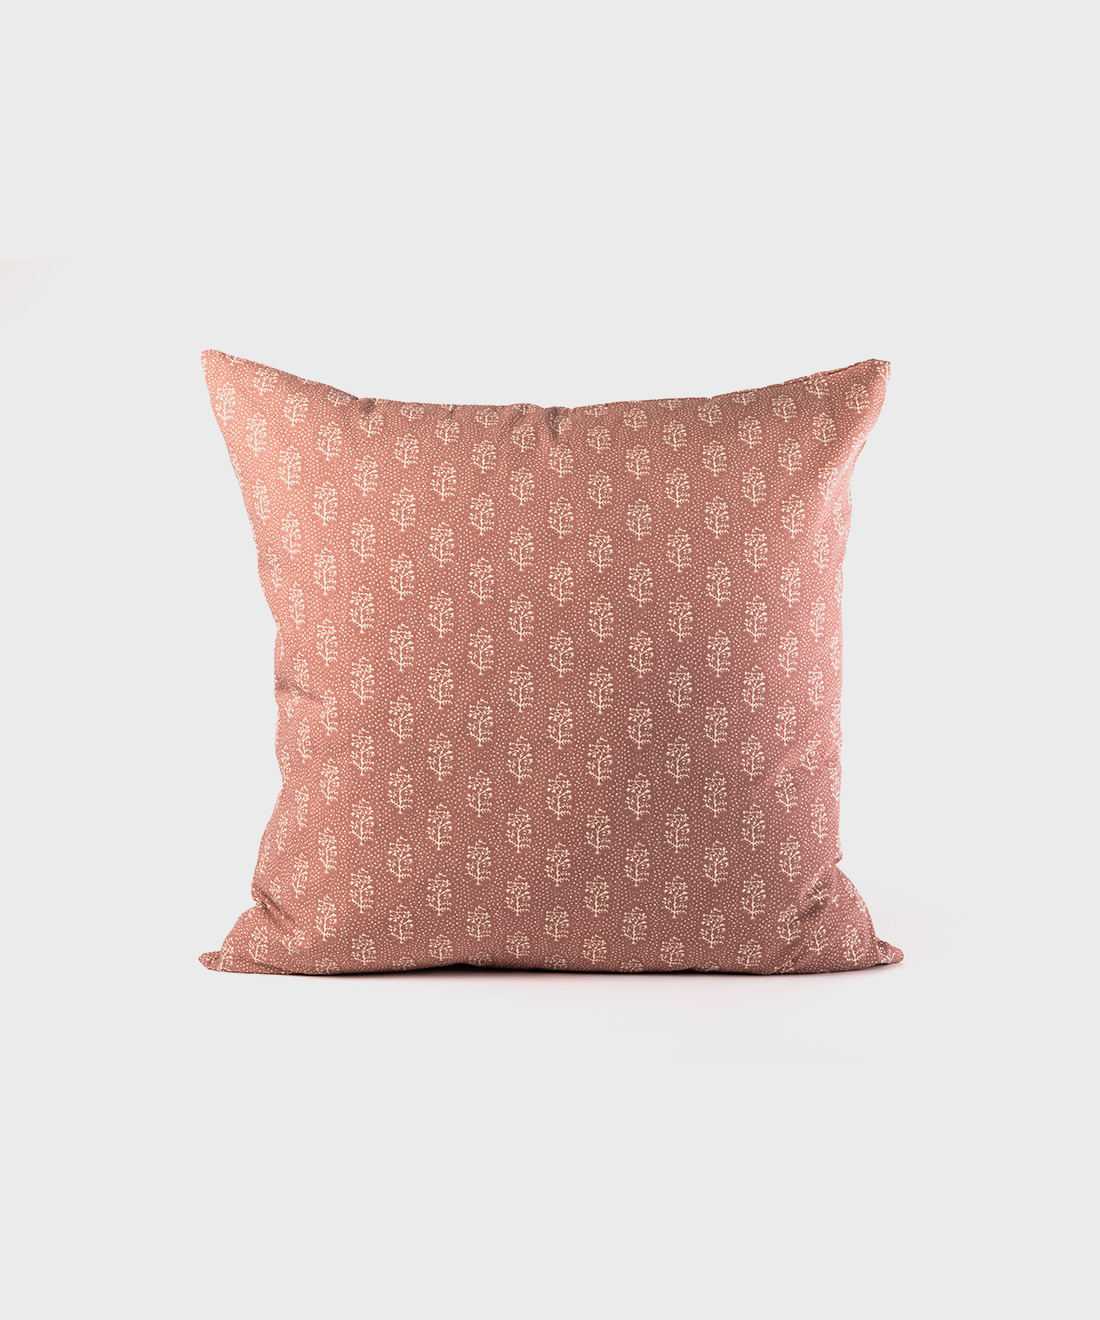 Clove Scatter Cushion in Mulberry